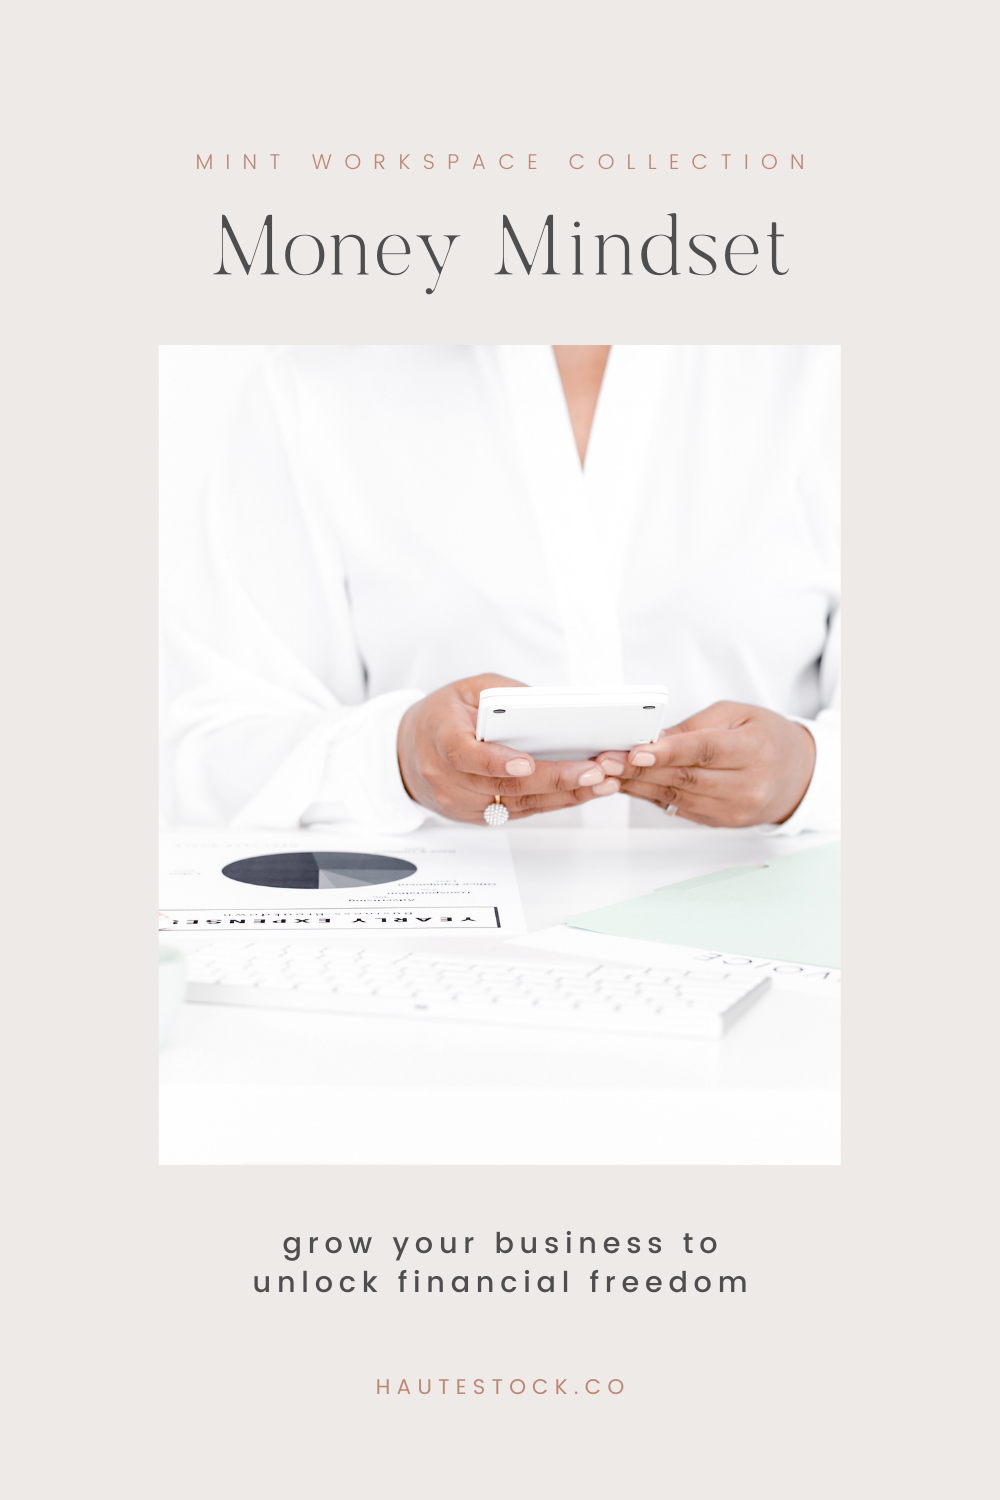 Woman working on calculator stock photos. Money mindset stock images from Haute Stock. Woman calculating expenses stock photo. Click for more.